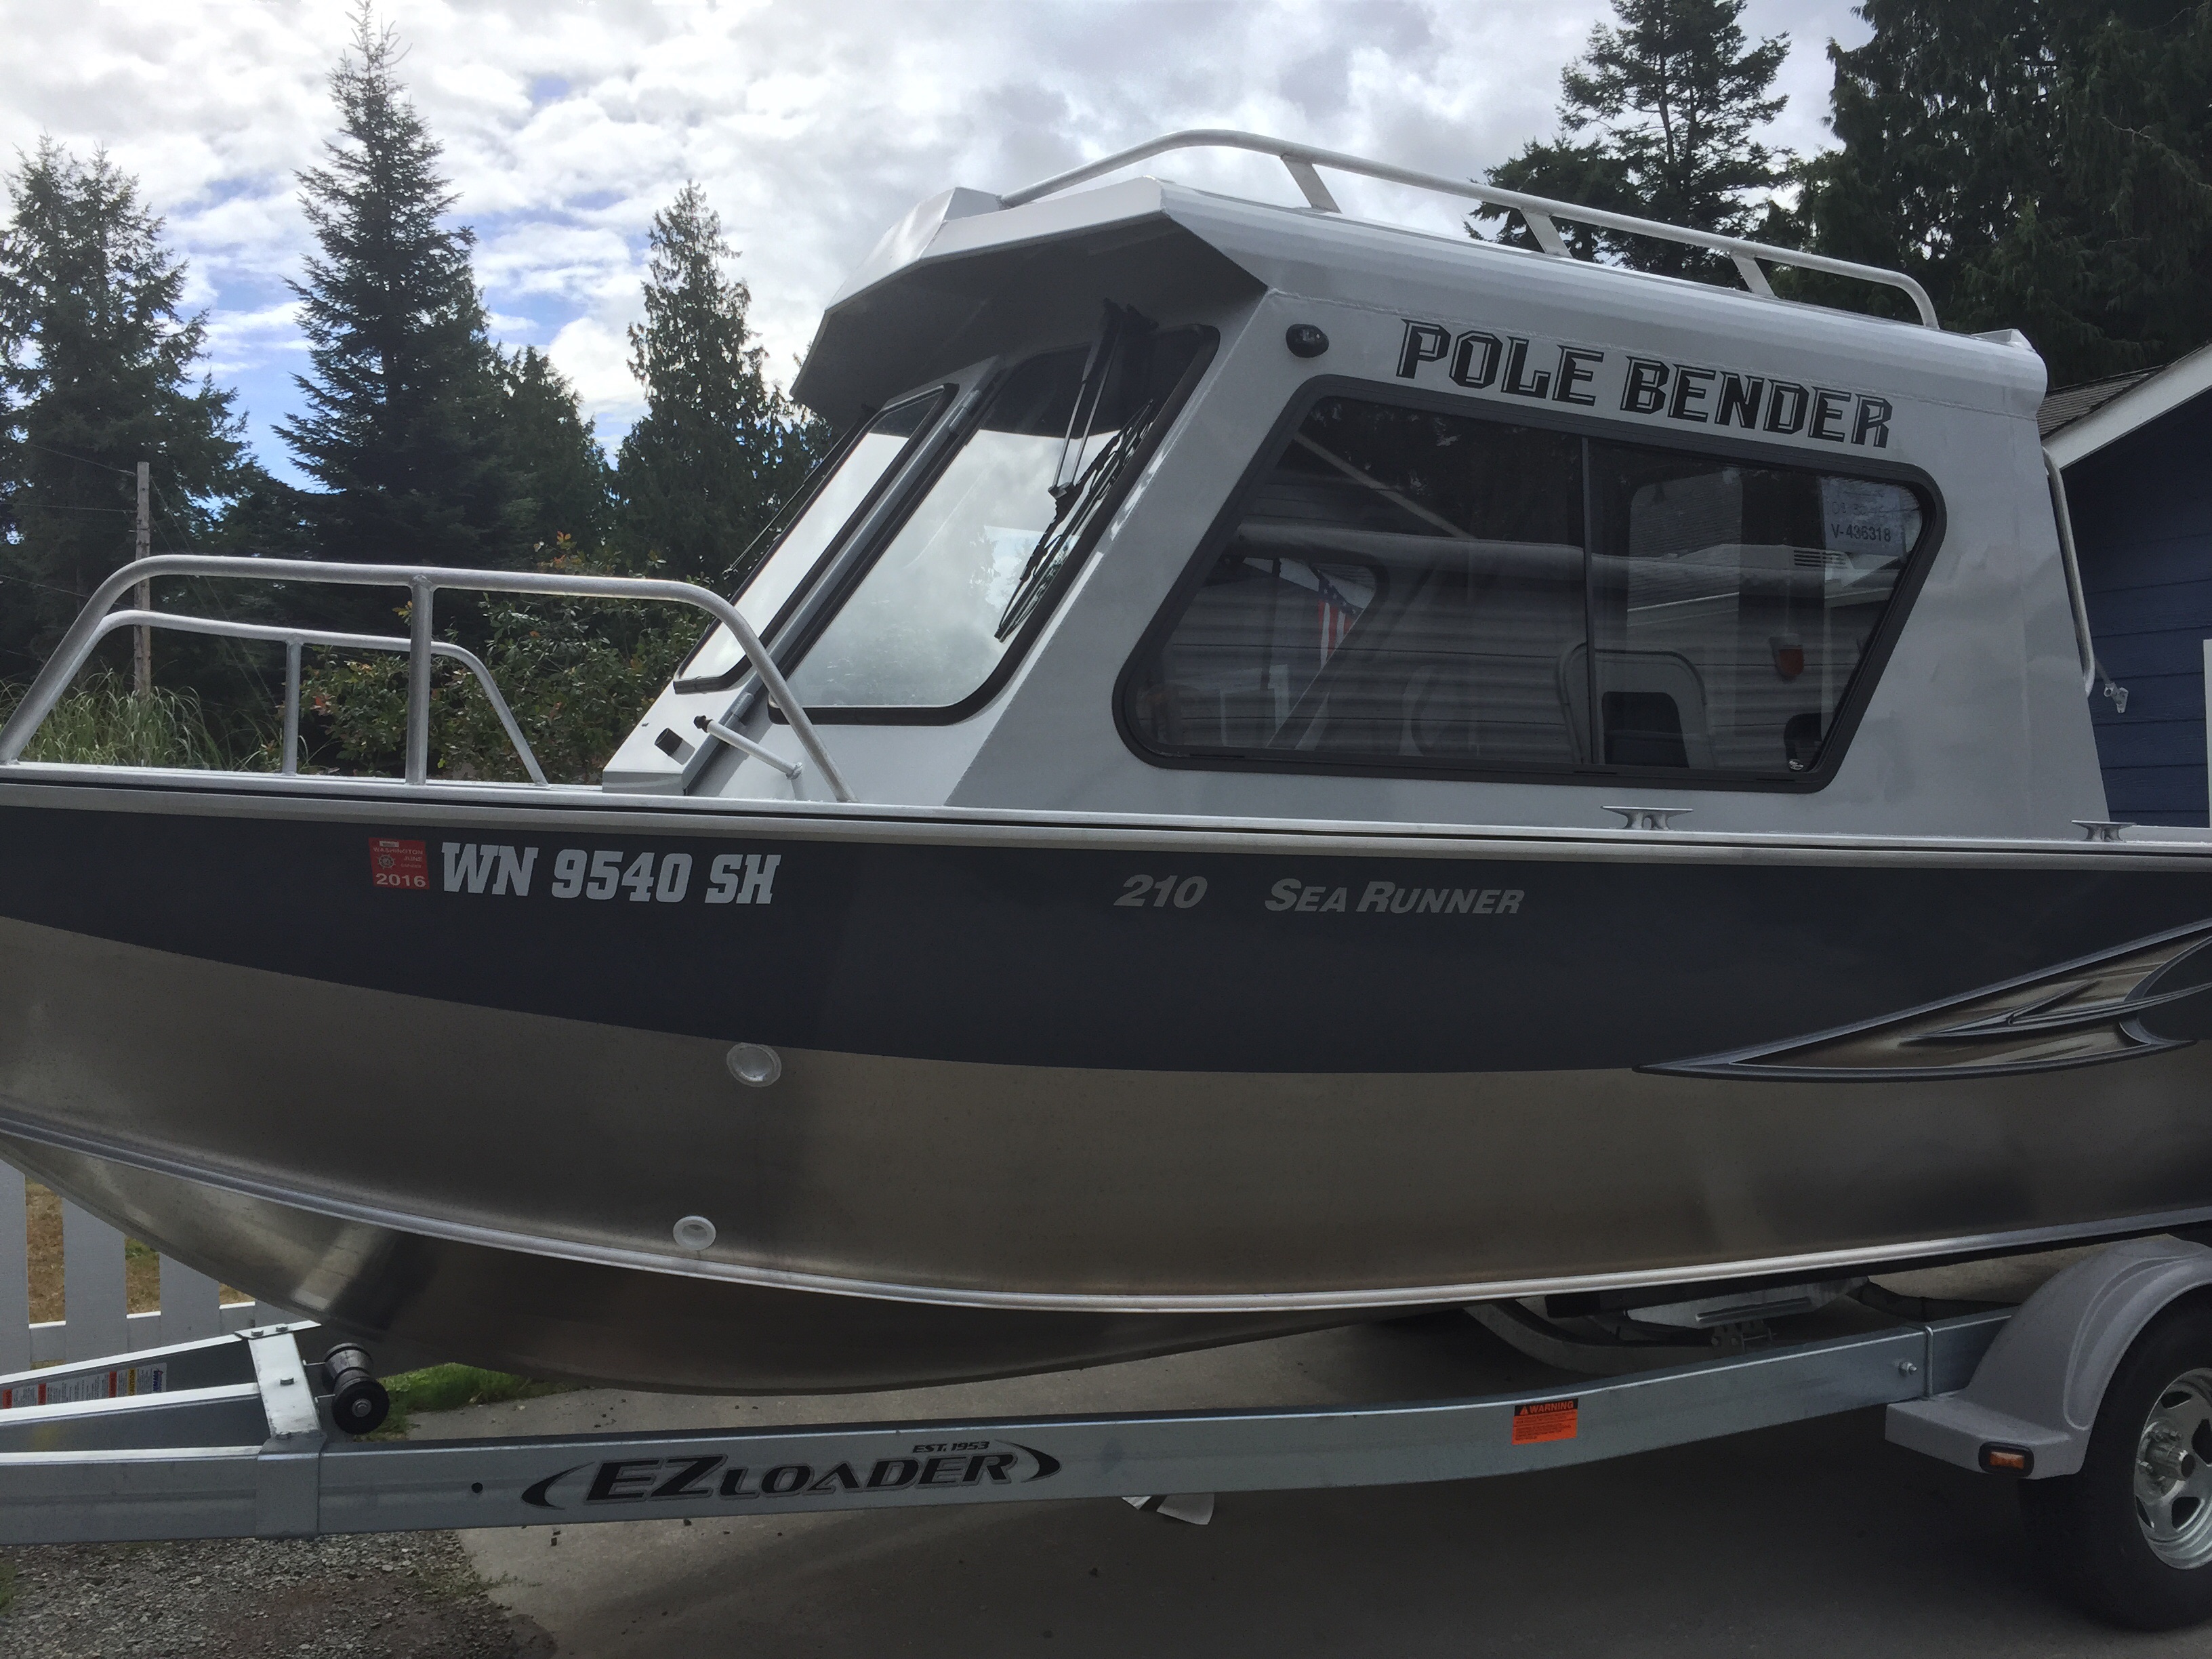 pole bender decal and registration numbers